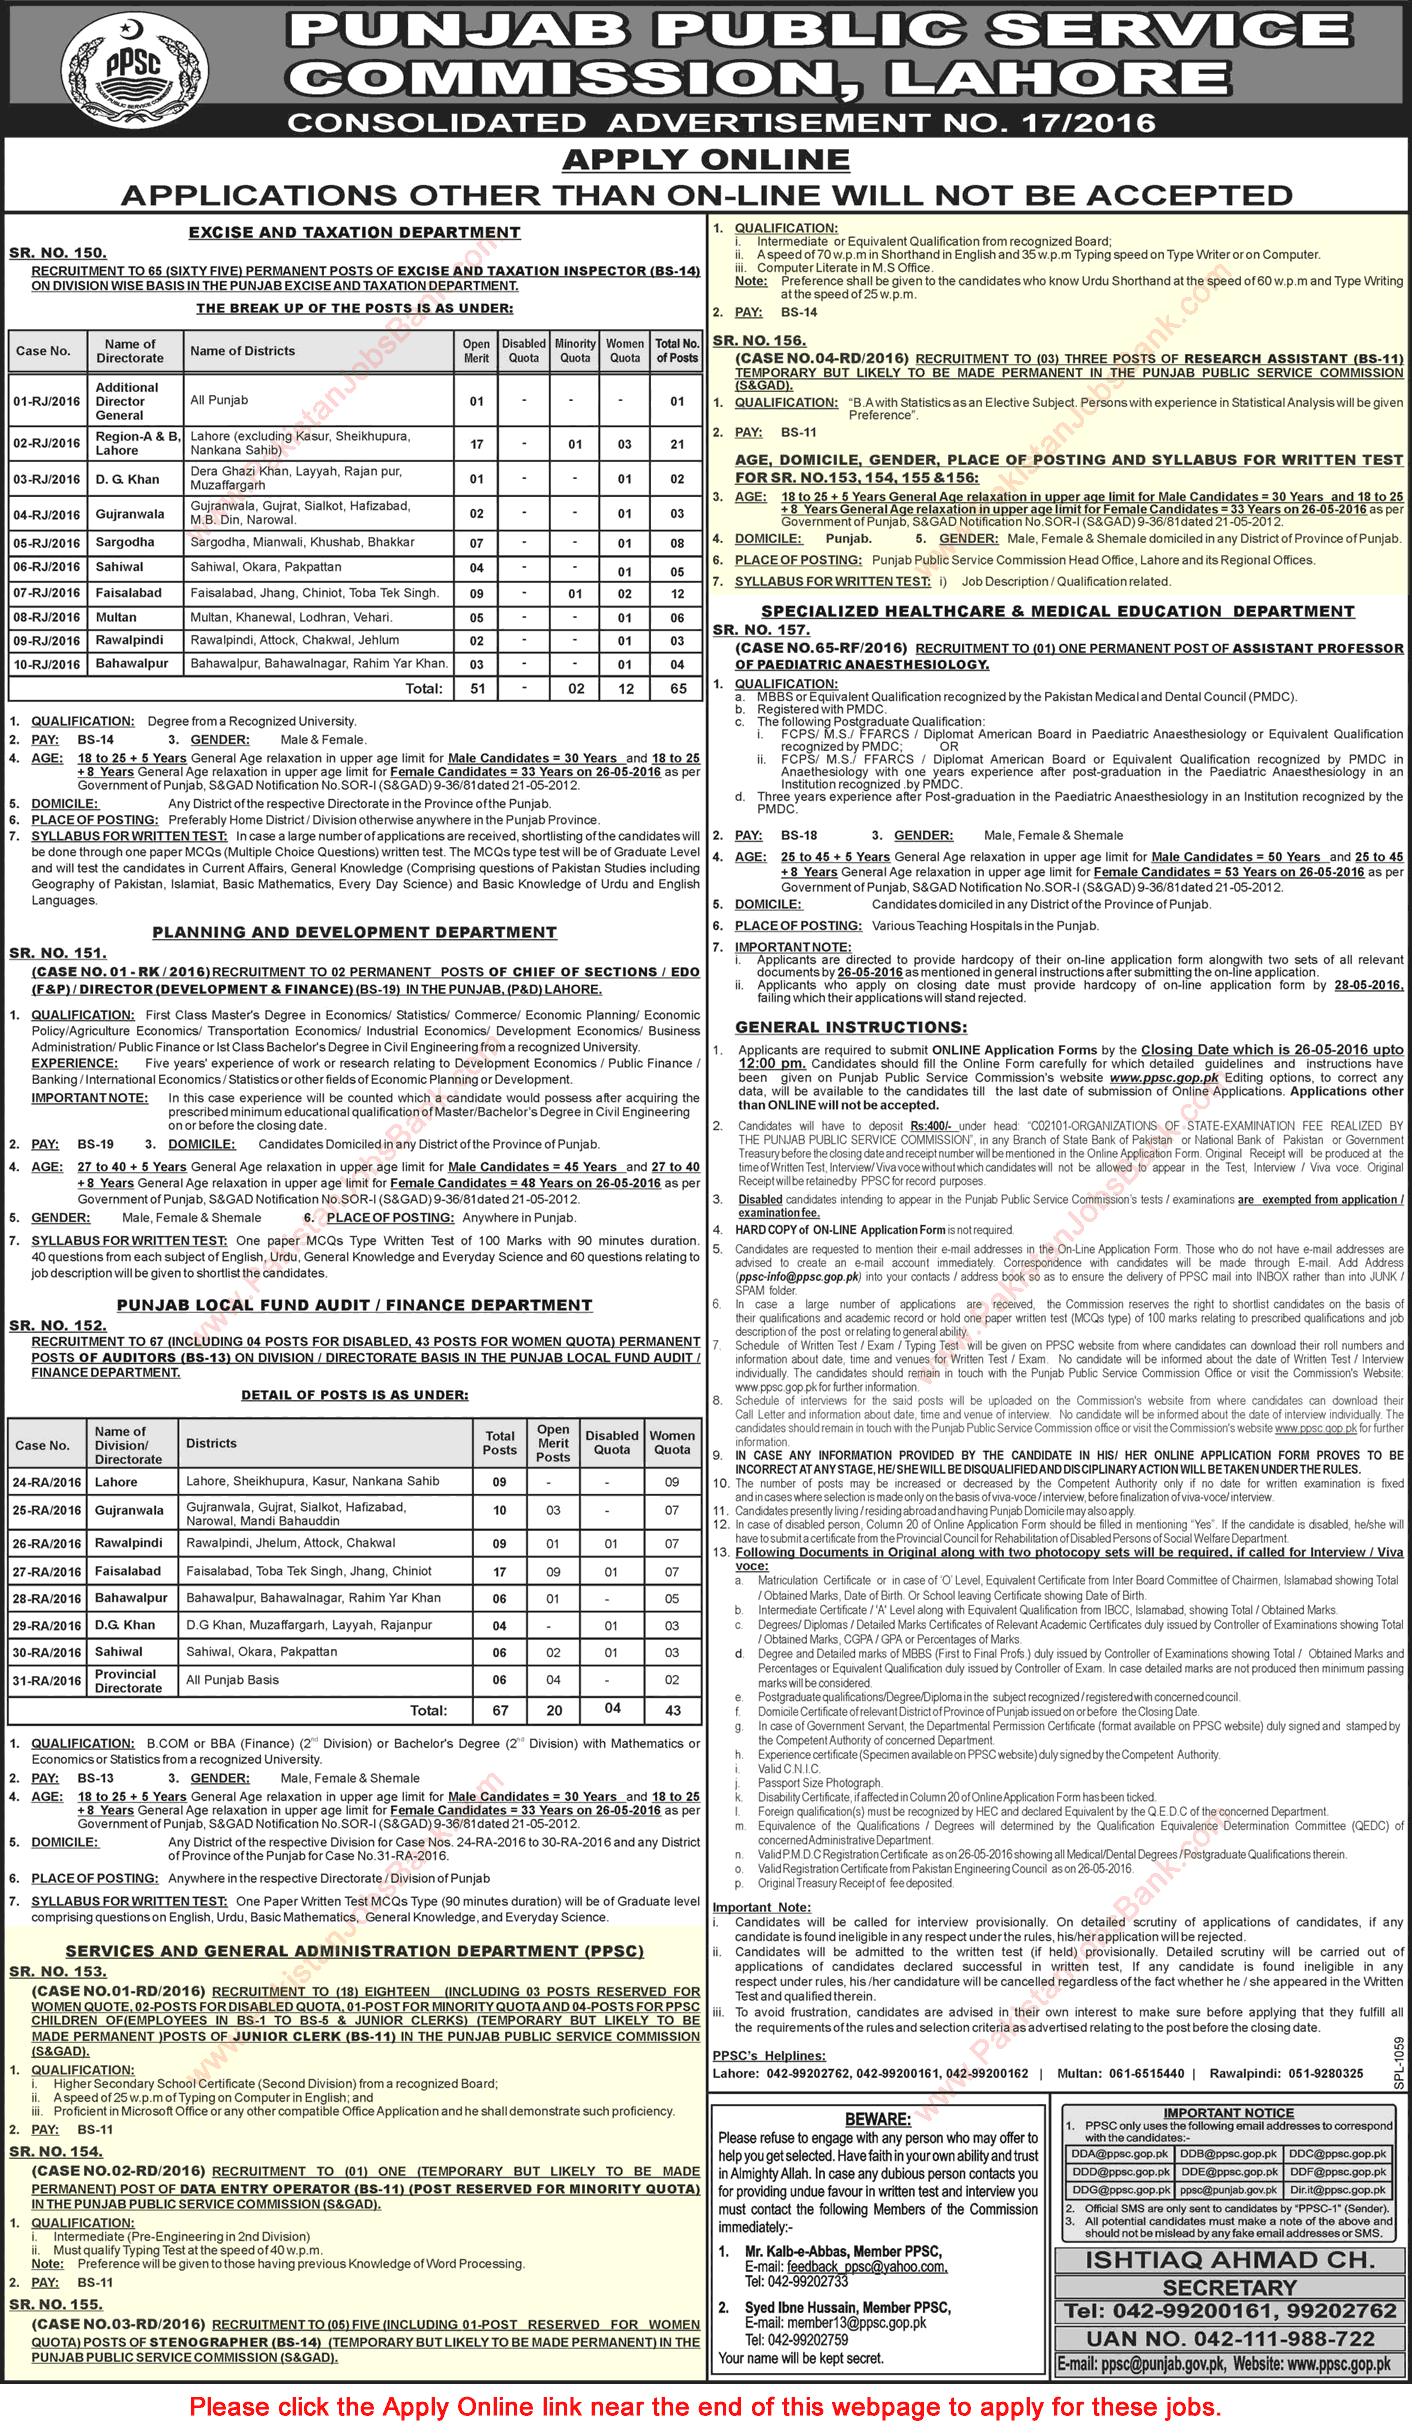 PPSC Jobs May 2016 Junior Clerks, Stenographers, Research Assistants & DEO Apply Online Latest